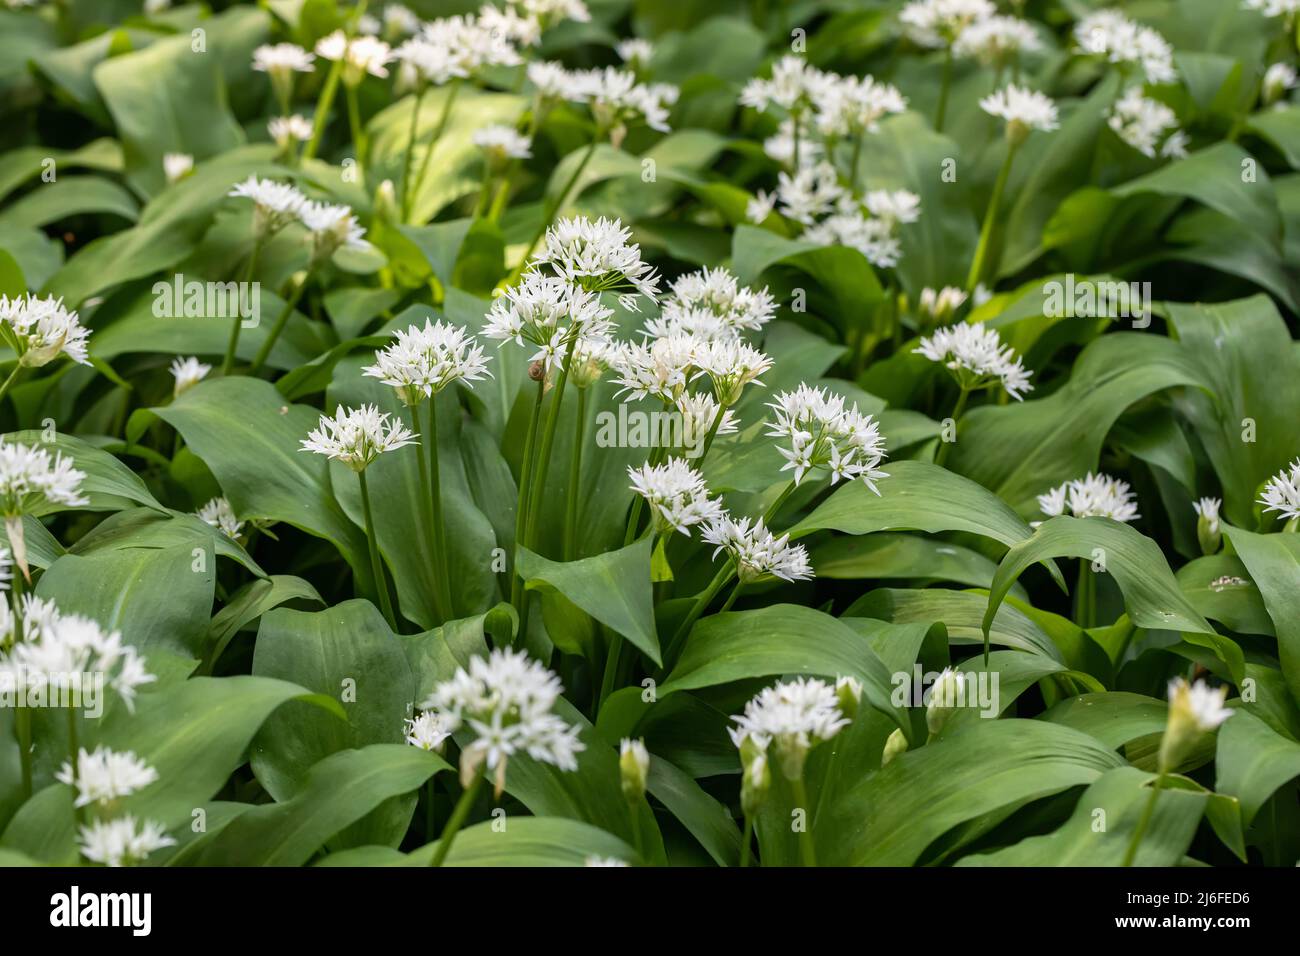 Close up of the white flowers of Wild garlic - Allium Ursinum a pungent plant growing in woodland during April, England, UK Stock Photo